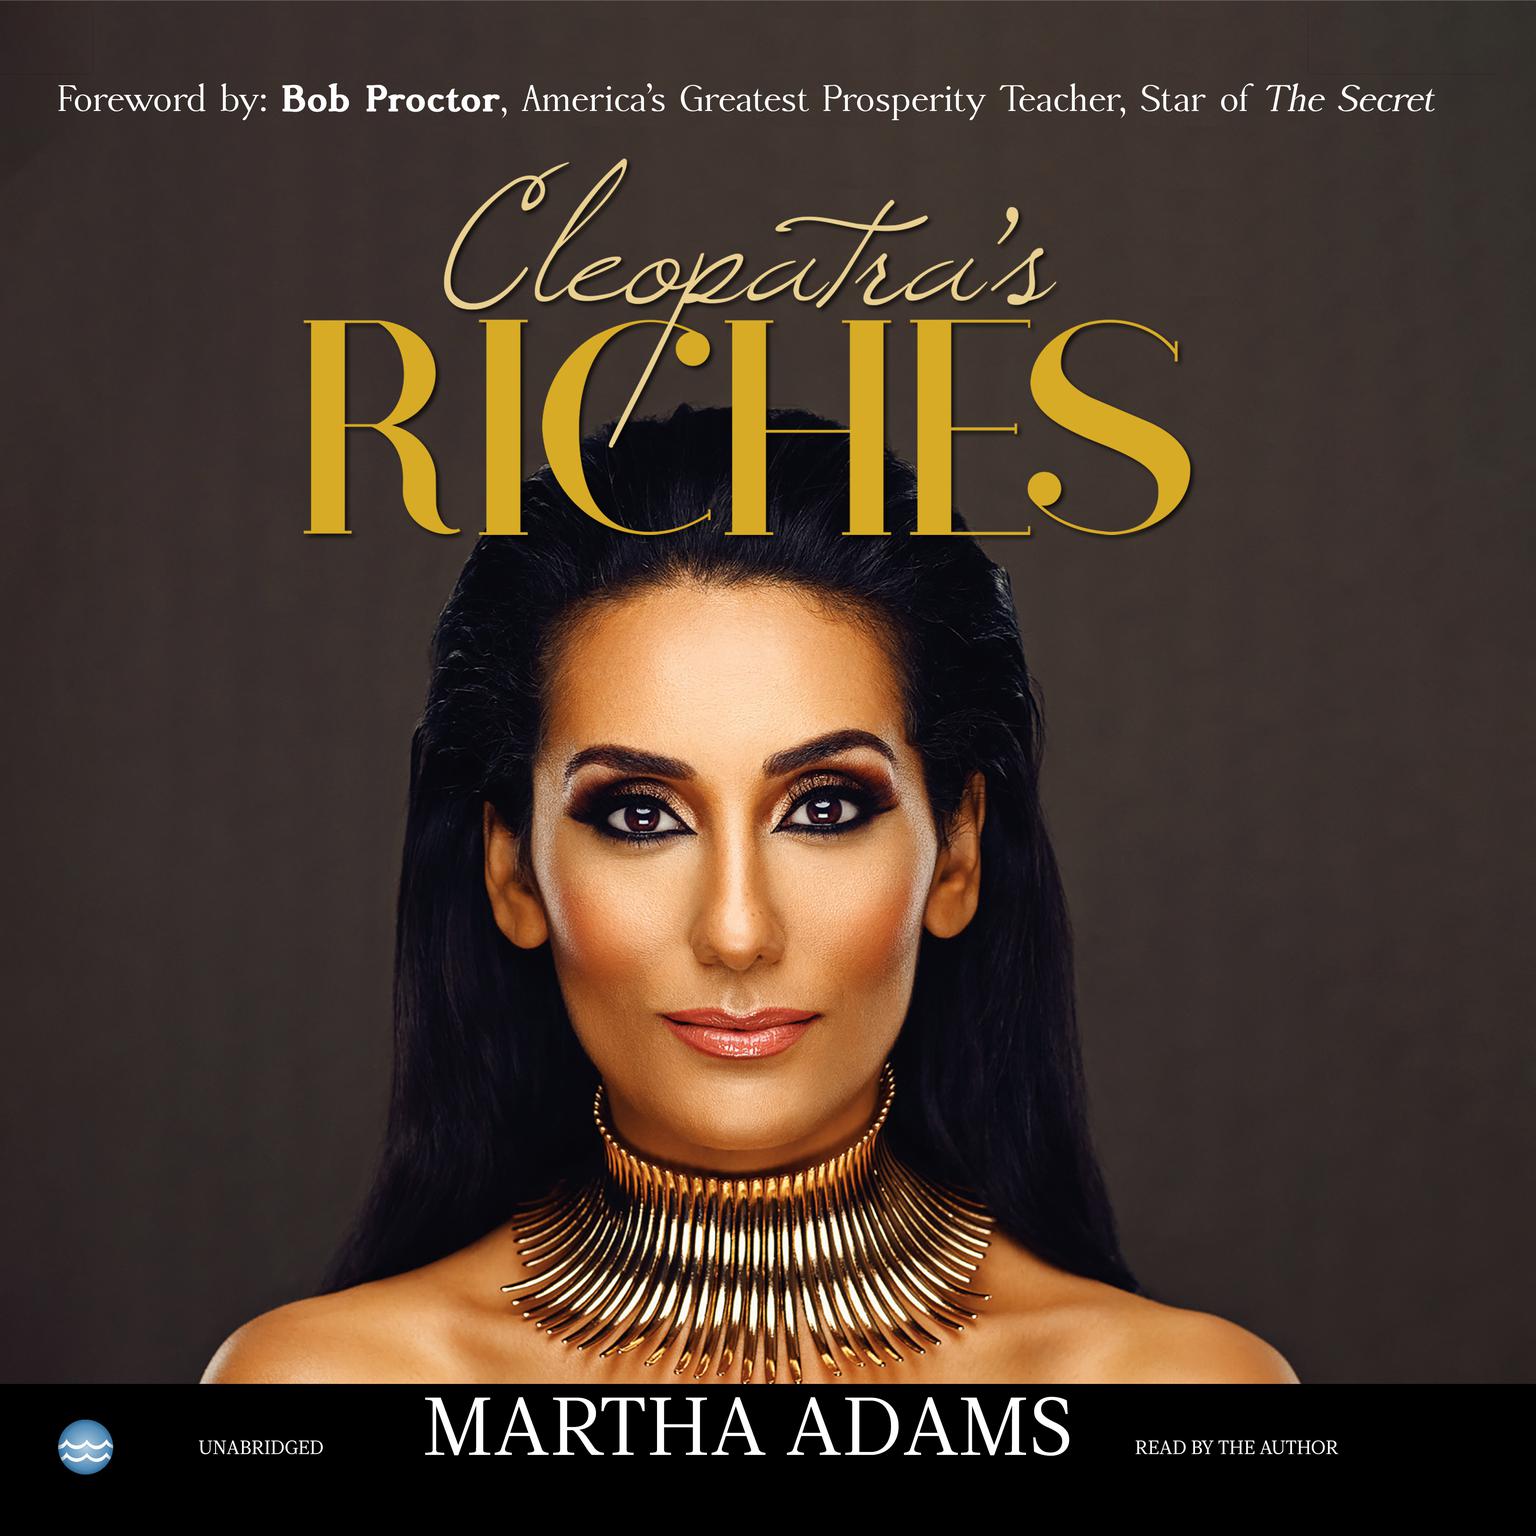 Cleopatra’s Riches: How to Earn, Grow, and Enjoy Your Money to Enrich Your Life Audiobook, by Martha Adams